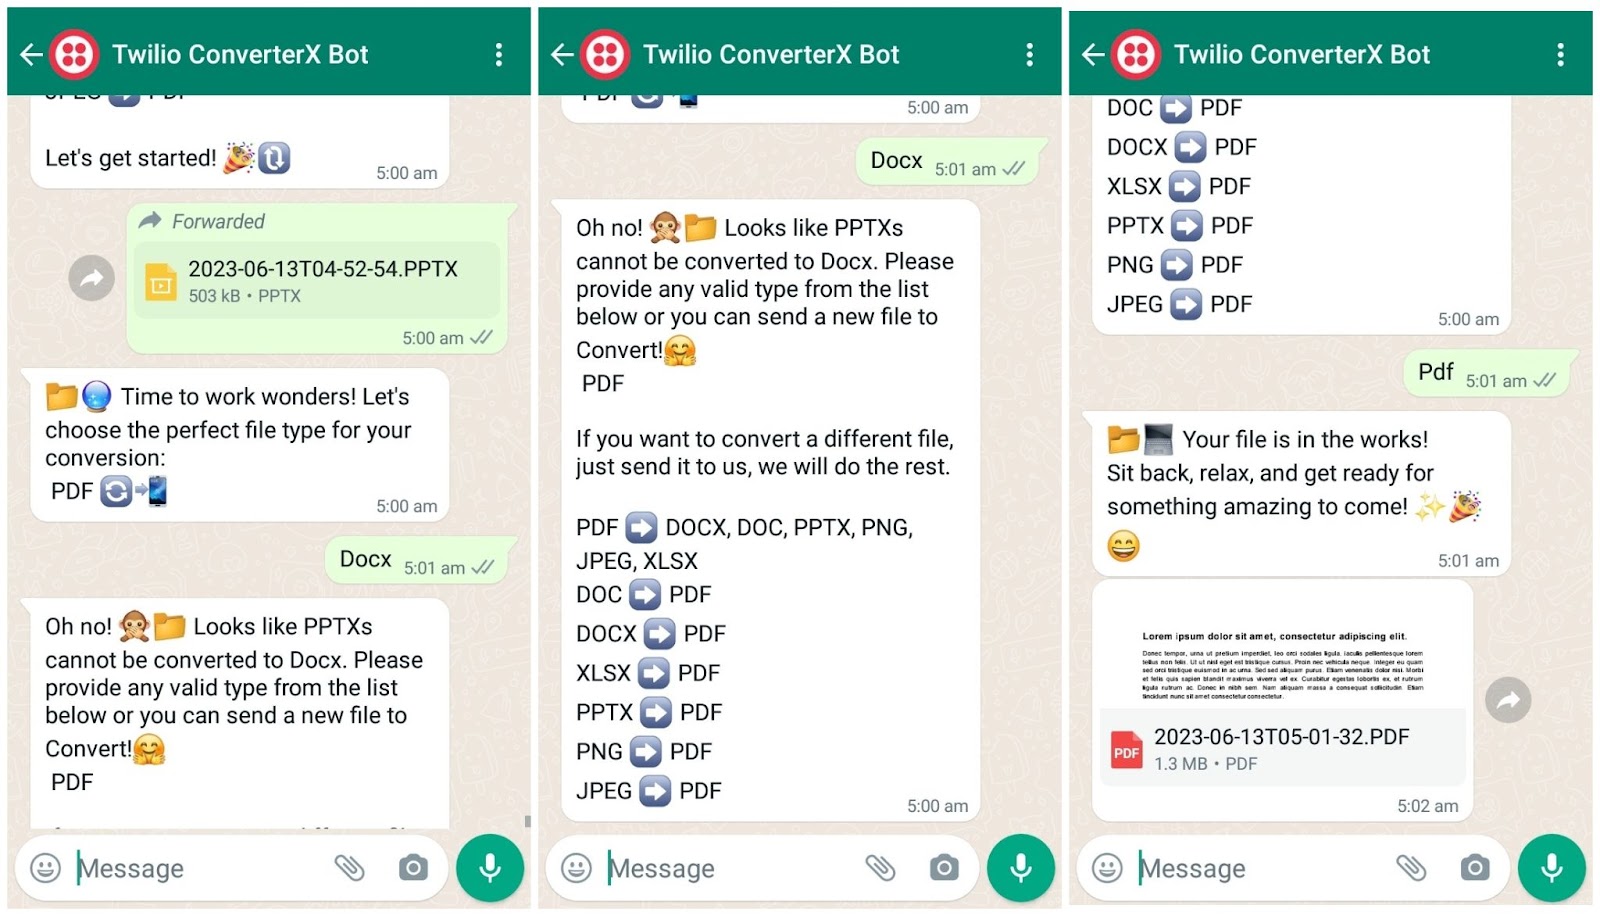 A WhatsApp conversation: A user starts by sending a PPT file. In response, the chatbot provides a list of file formats to which the PPT can be converted, noting that currently, PPTs can only be converted to PDF. The user then sends another WhatsApp message, specifying "Docx." The bot responds, indicating that the requested conversion is unsupported and asks the user to enter a valid format (PDF). The user complies by sending another WhatsApp message, specifying "PDF." The bot acknowledges the user&#x27;s choice and informs them that the file conversion is now in progress. After some time, the bot sends the converted "PDF" file to the user.